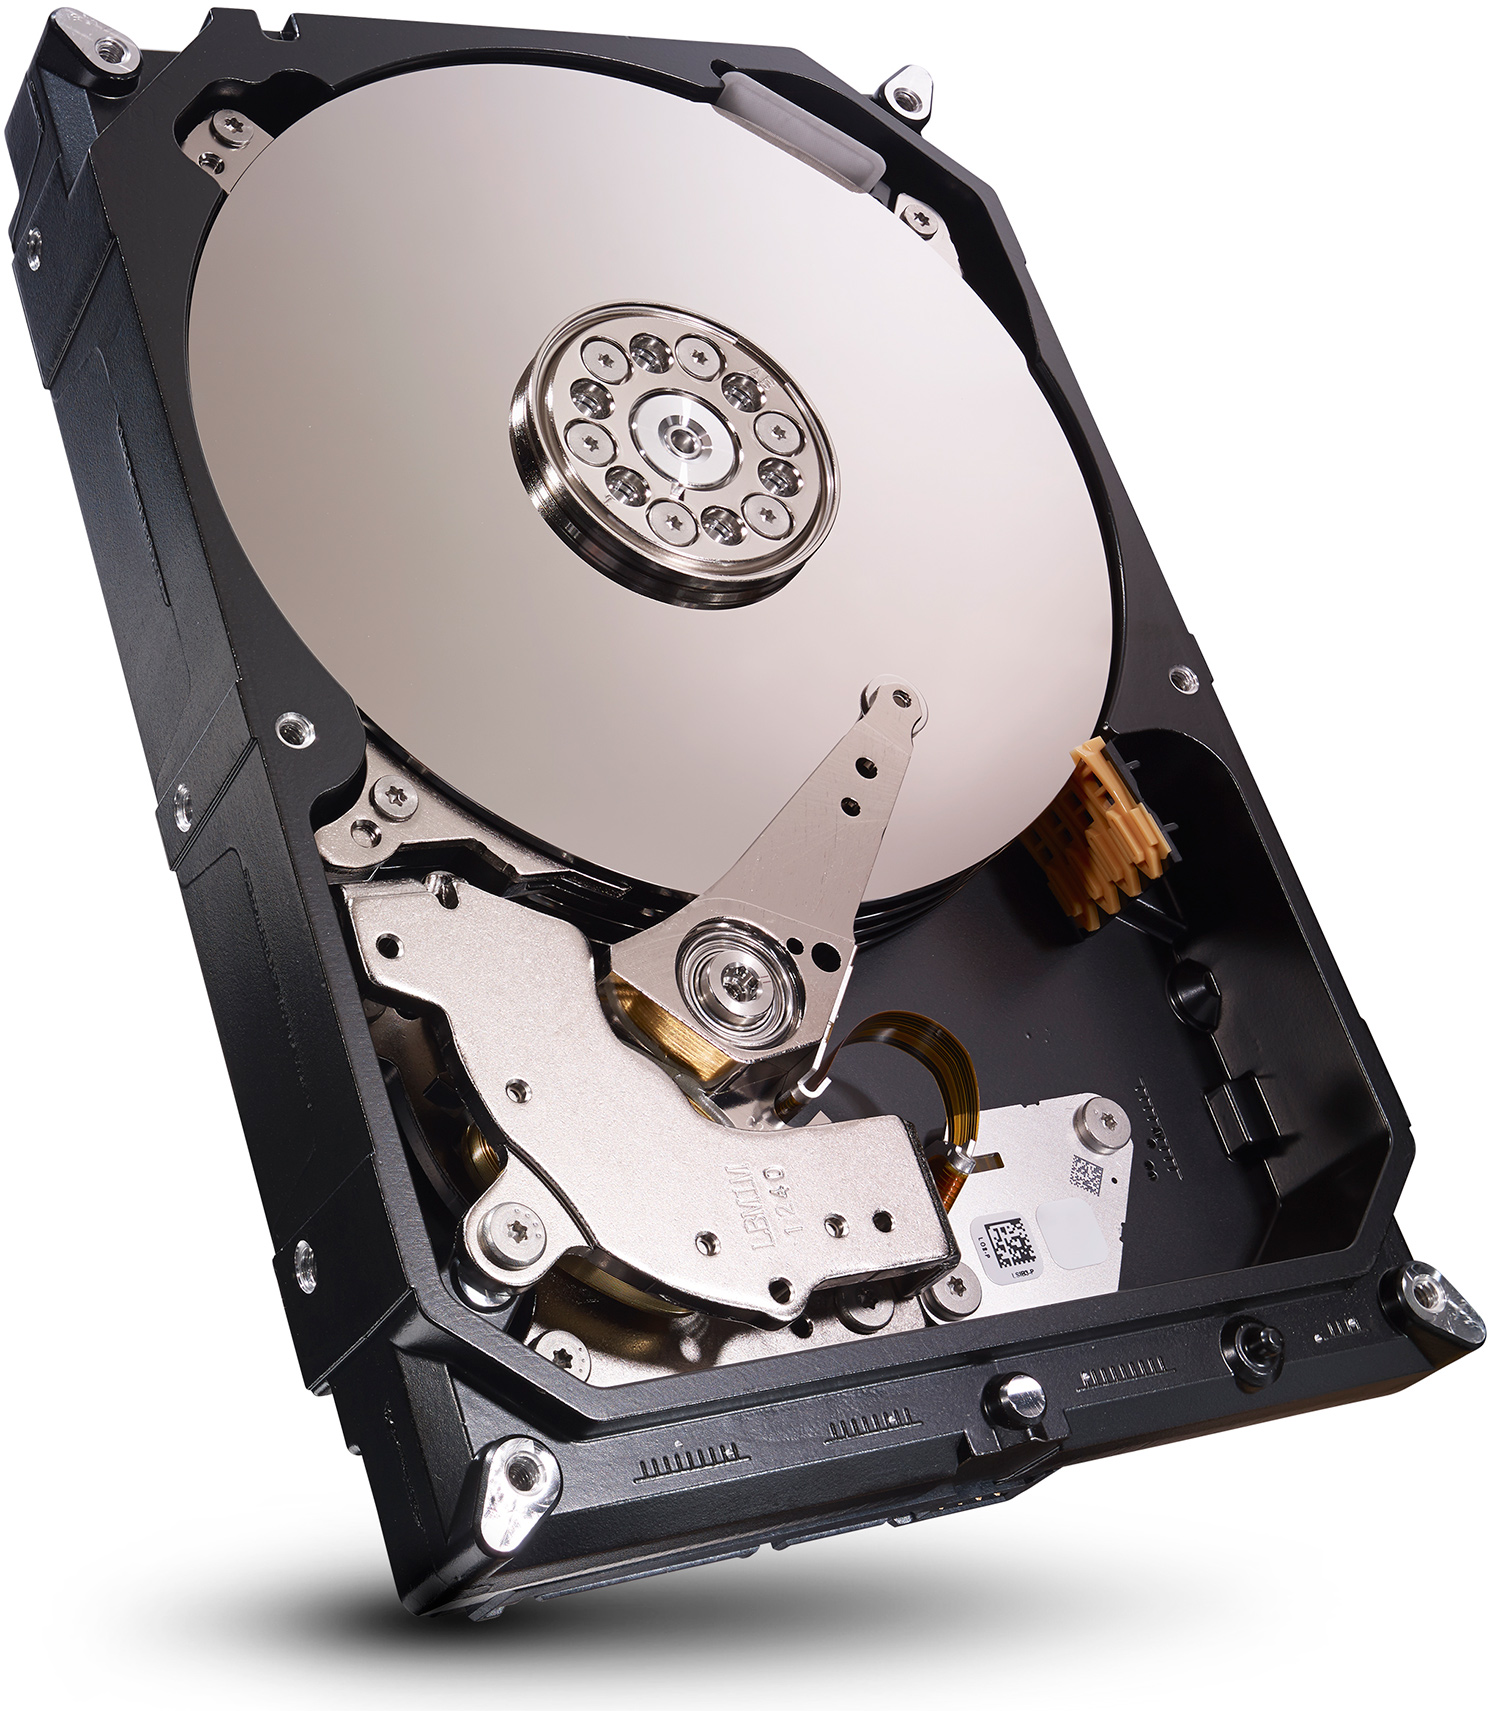 Media asset in full size related to 3dfxzone.it news item entitled as follows: Seagate introdurr nel 2015 il primo HDD con capacit di 10TB | Image Name: news22018_seagate-nas-hdd_1.jpg